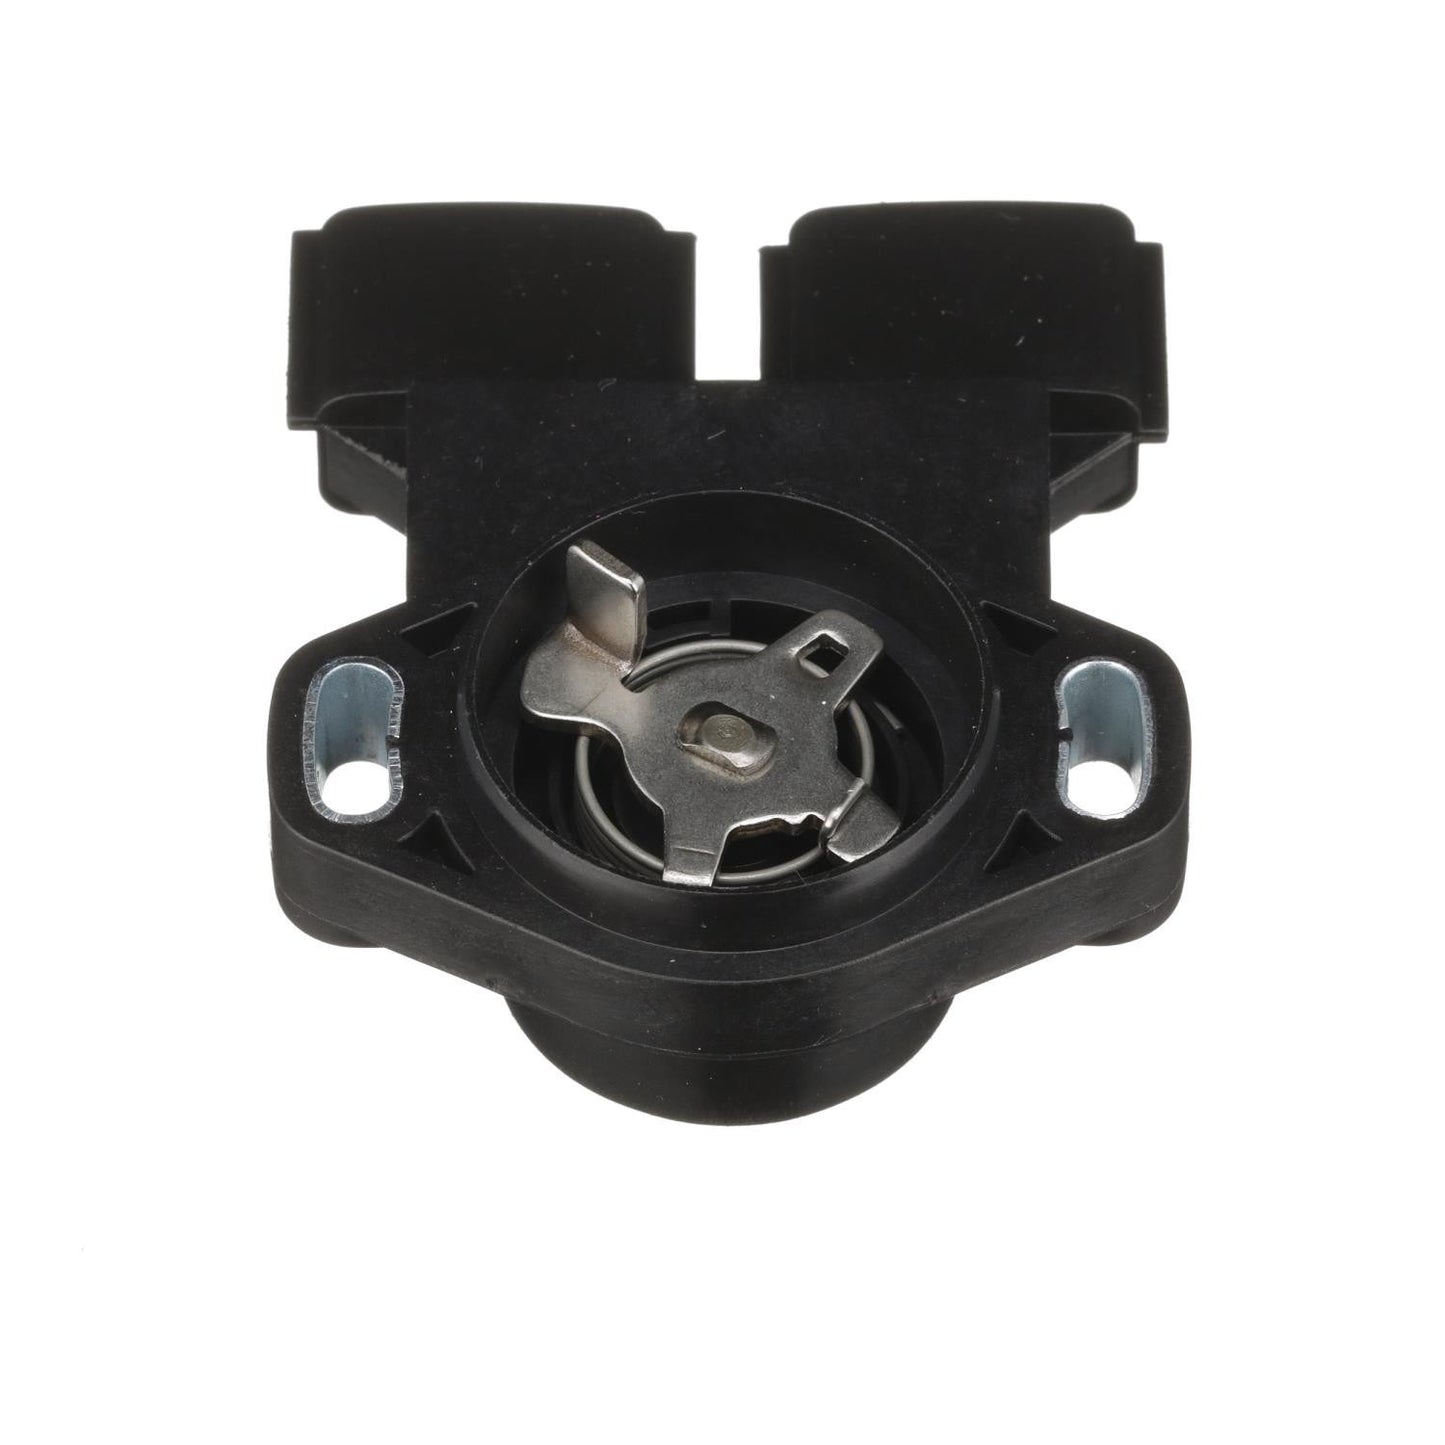 Back View of Throttle Position Sensor STANDARD IGNITION TH230